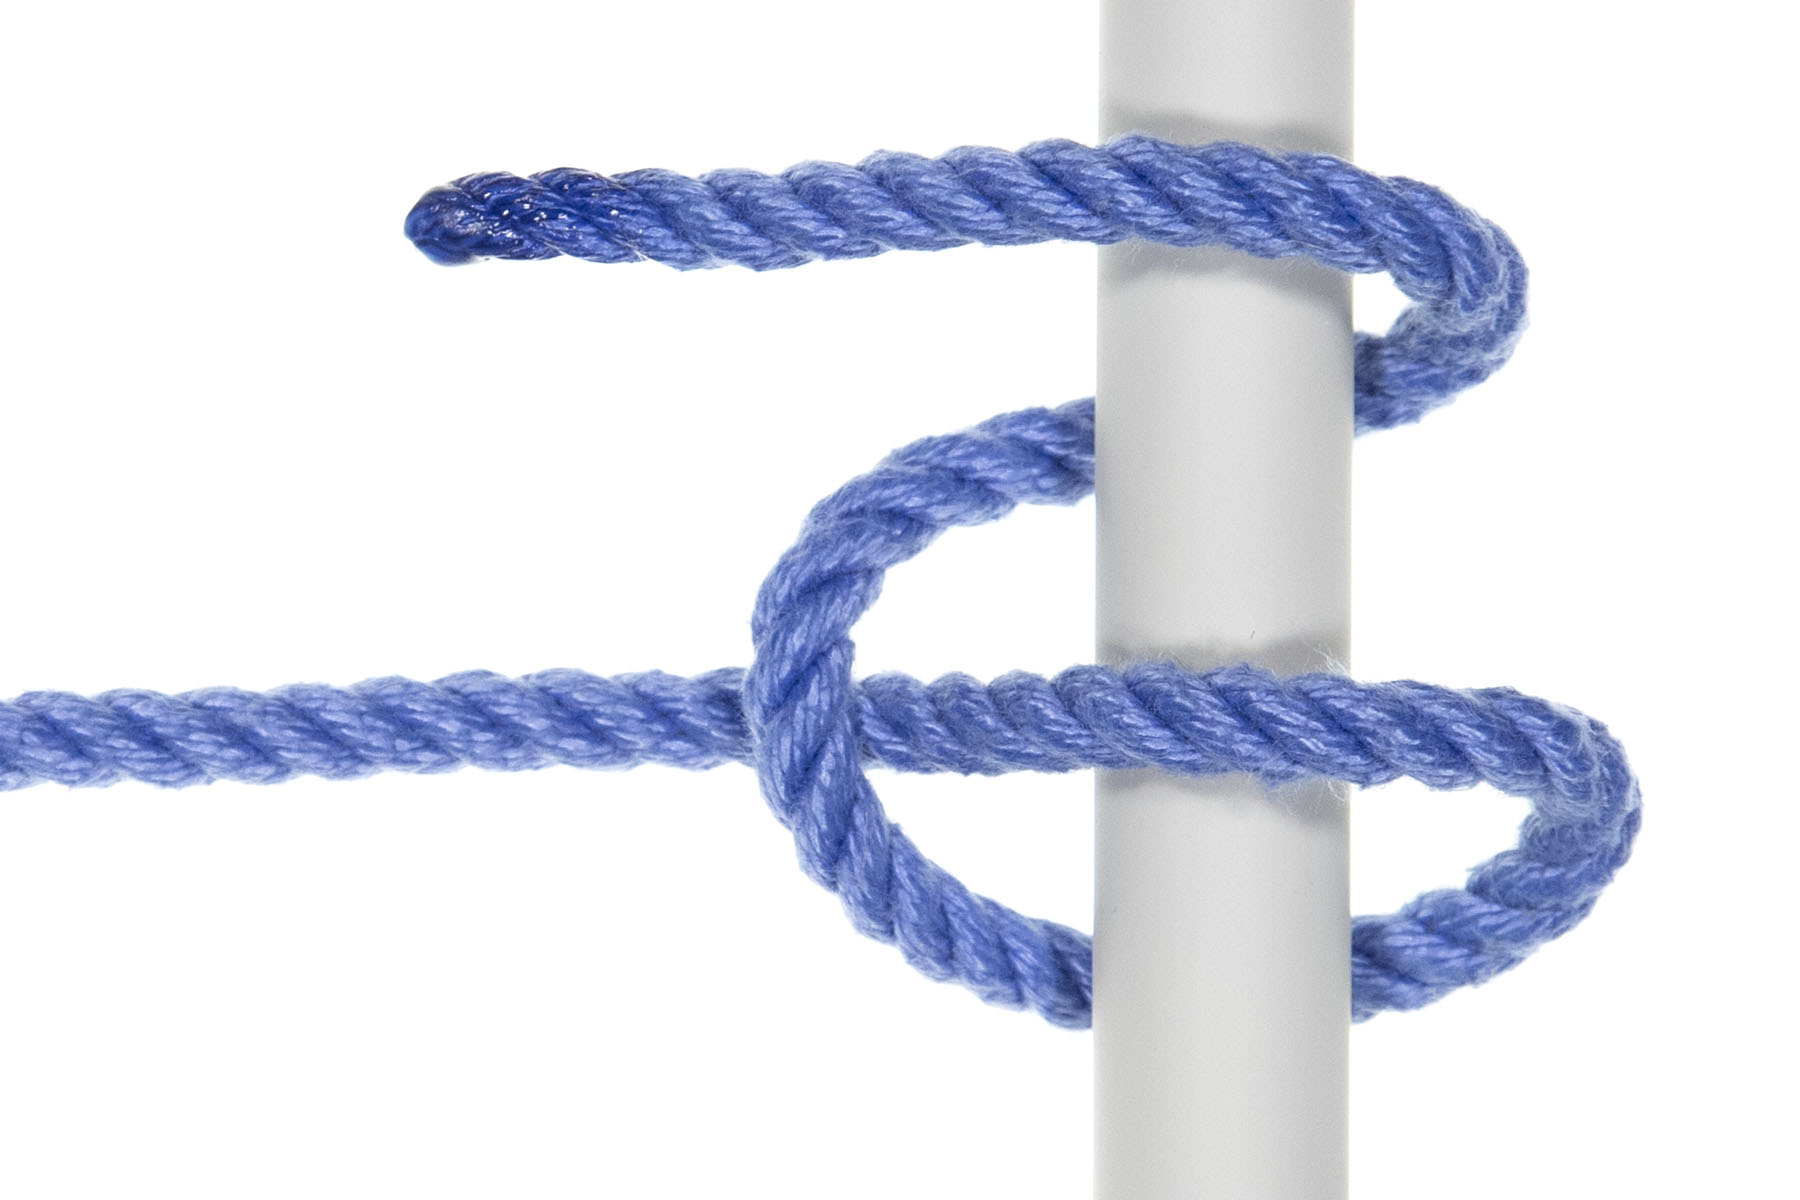 A one inch gray pole crosses the frame vertically. A blue rope enters from the left and crosses over the pole, then crosses under it, slightly lower in the frame. It crosses over the standing part, moving up the frame. Next, it crosses under the pole, then back over it, moving up the frame the whole time.